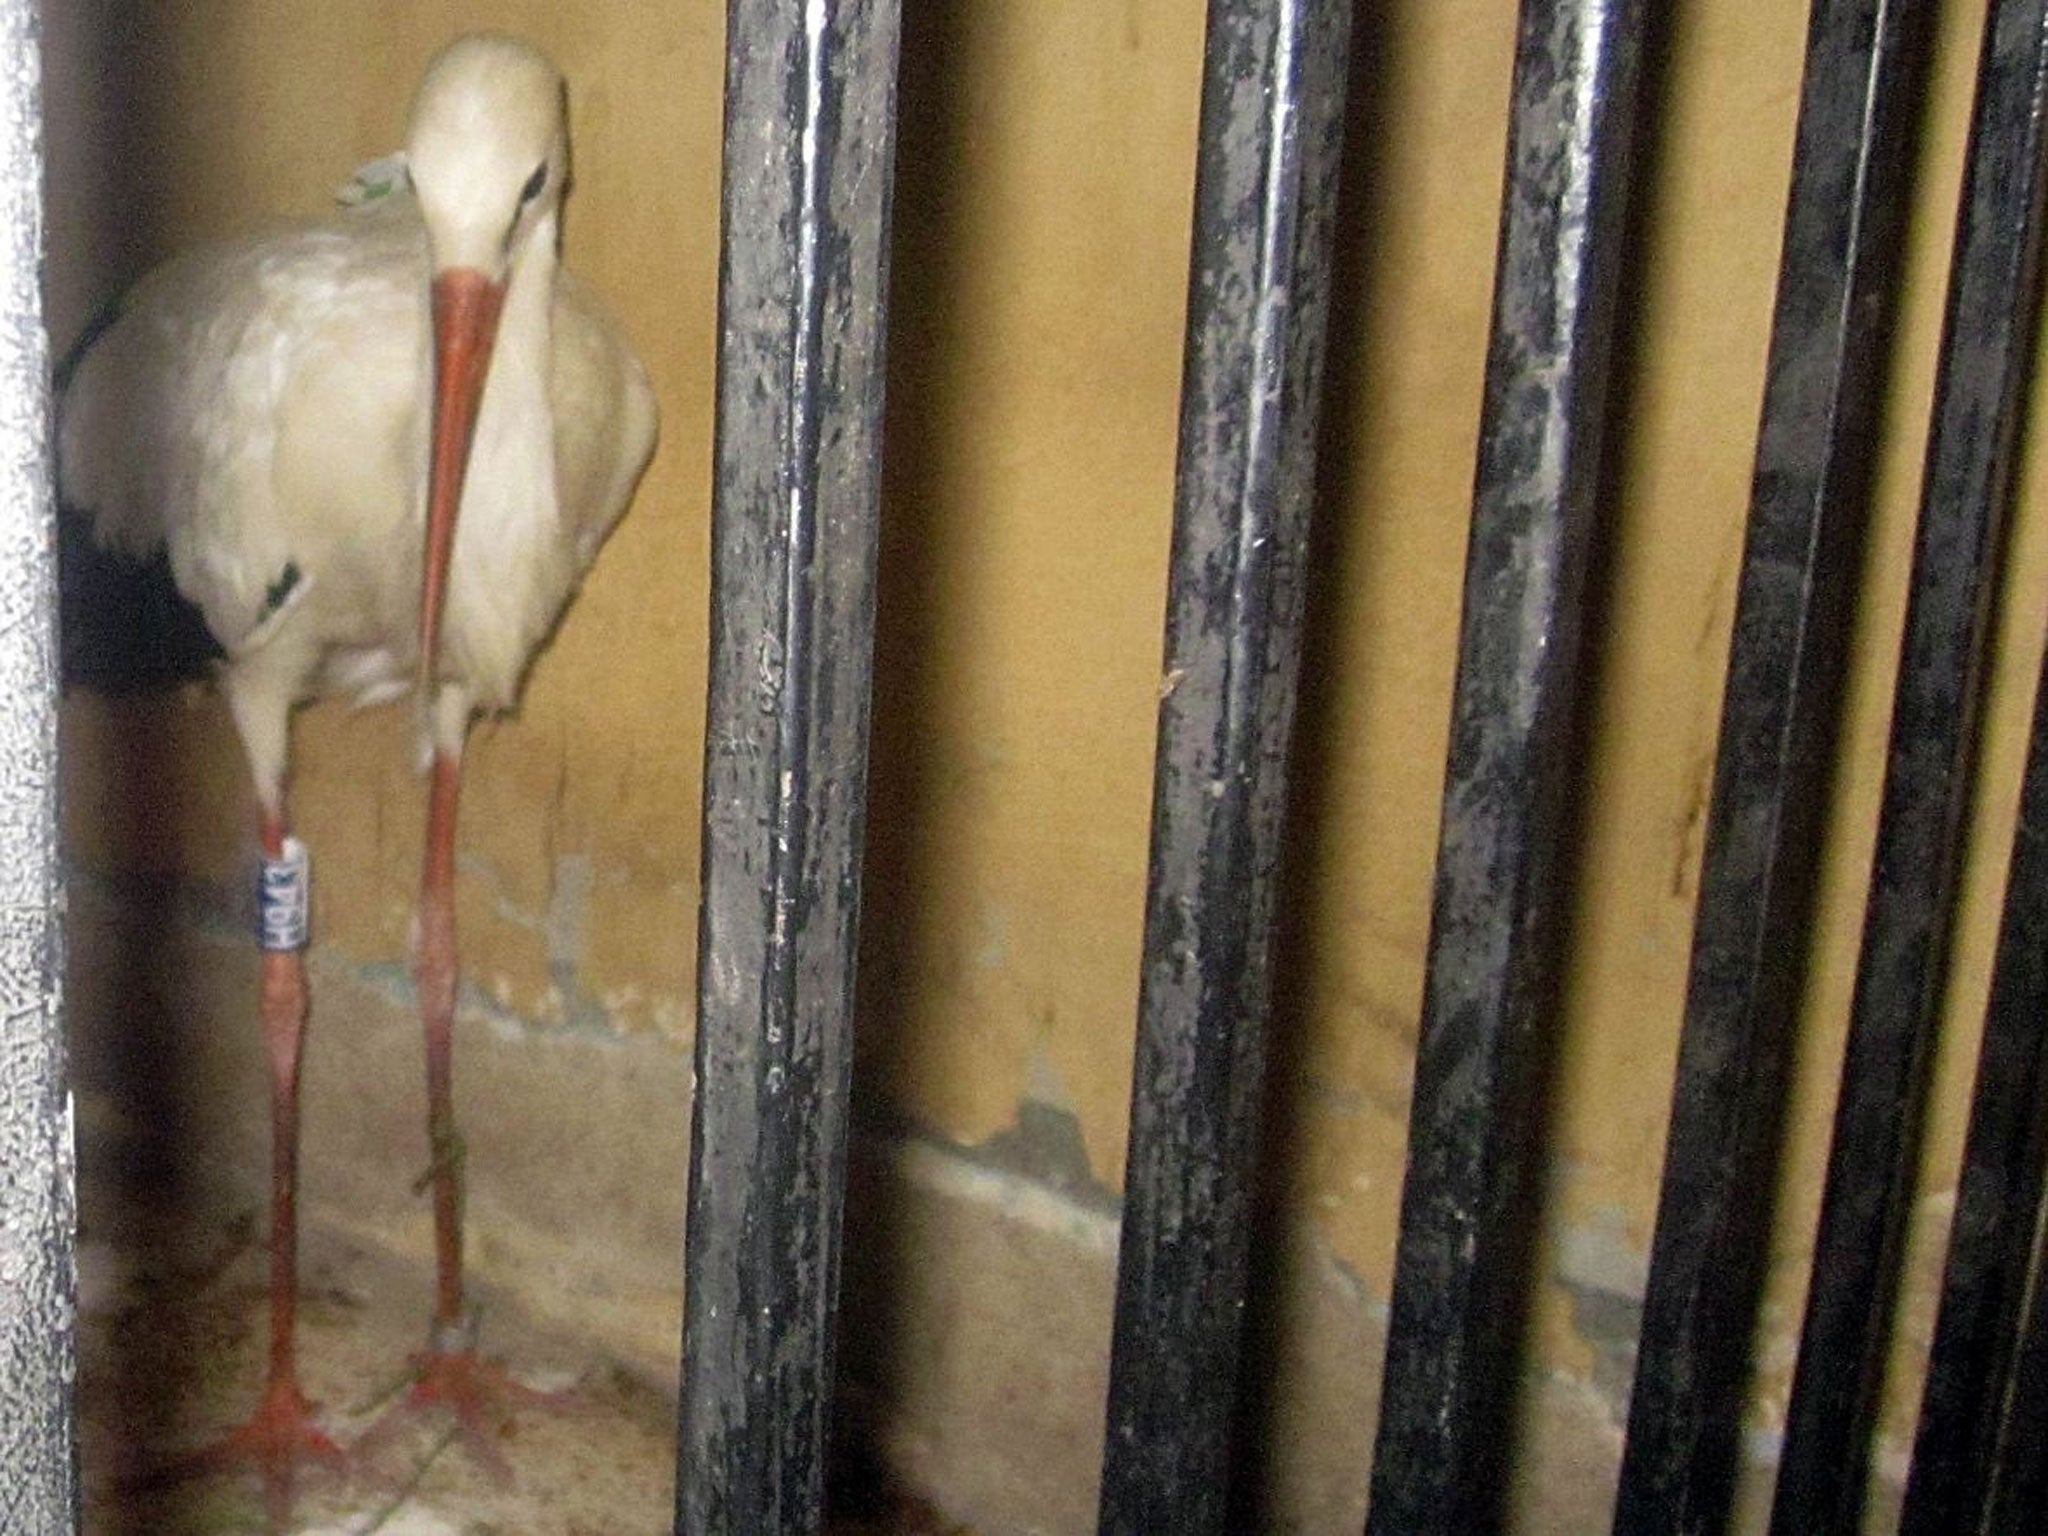 A migrating stork is held in a police station after a citizen suspected it of being a spy and brought it to the authorities in the Qena governorate.